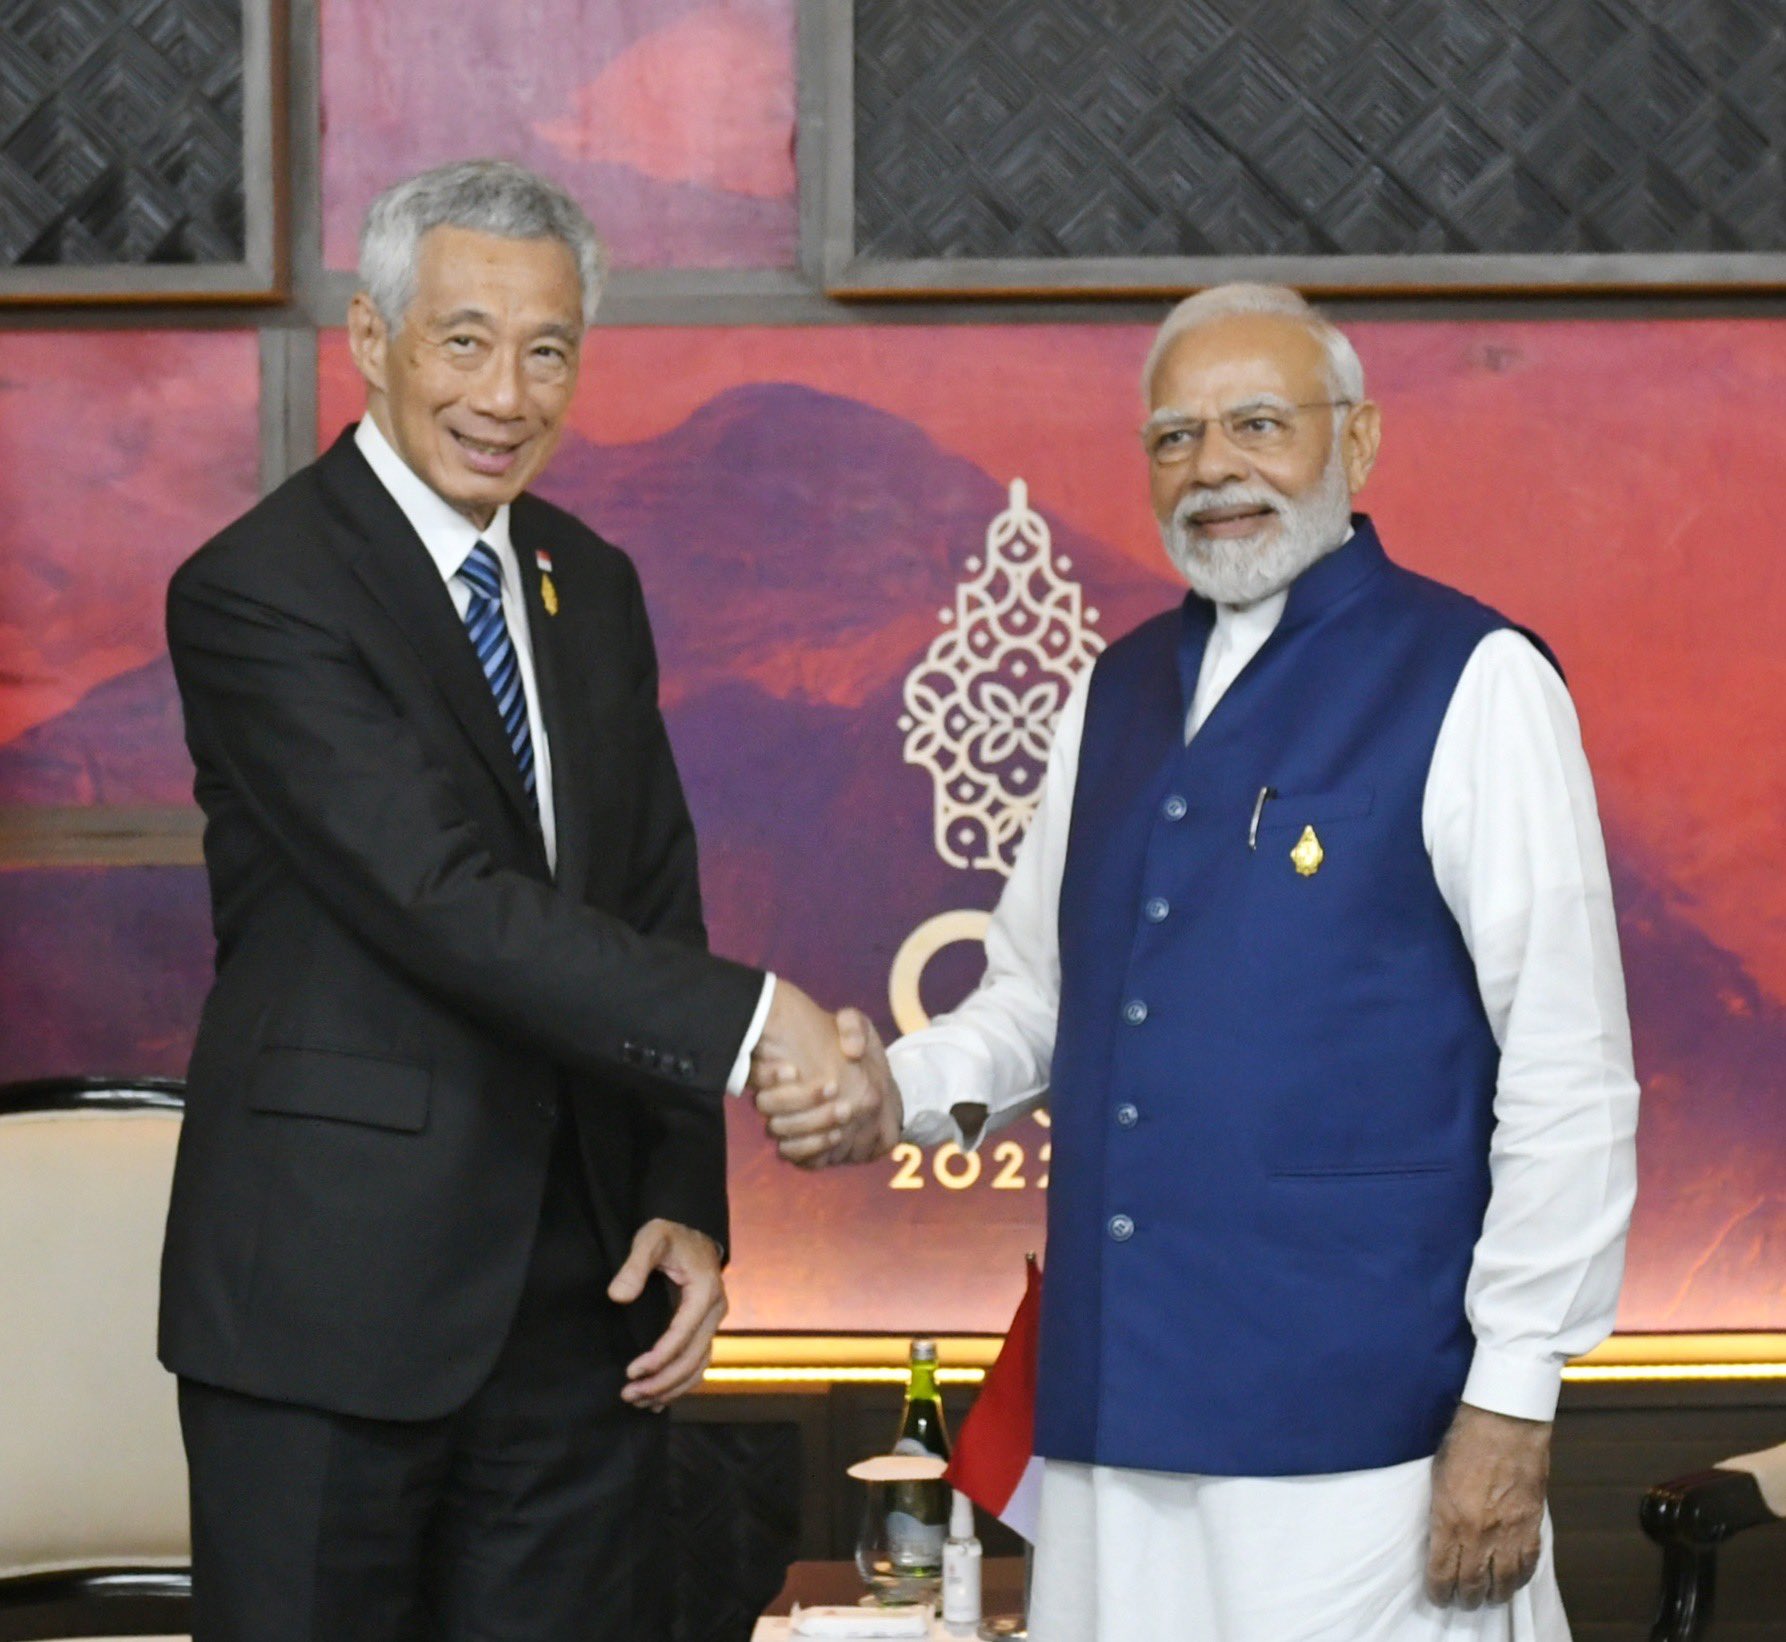 PM’s meeting with the PM of Singapore on the sidelines of G-20 Summit in Bali